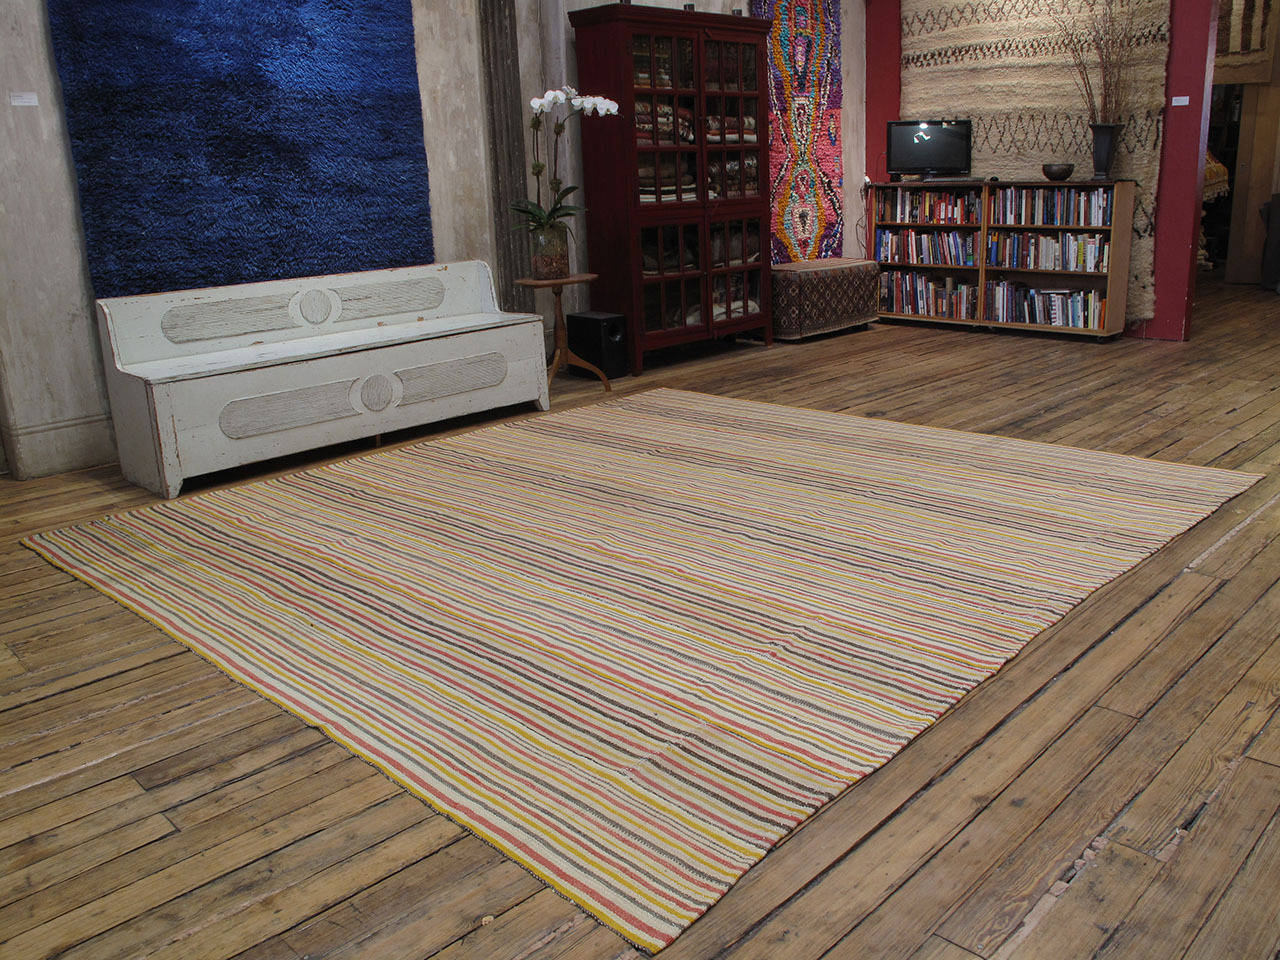 Large Striped Kilim rug. A large flat-woven floor cover or rug from Central Turkey, woven in narrow panels with colorful stripes. The structure is somewhat lightweight but it is a fairly sturdy weaving, suitable for moderate traffic.